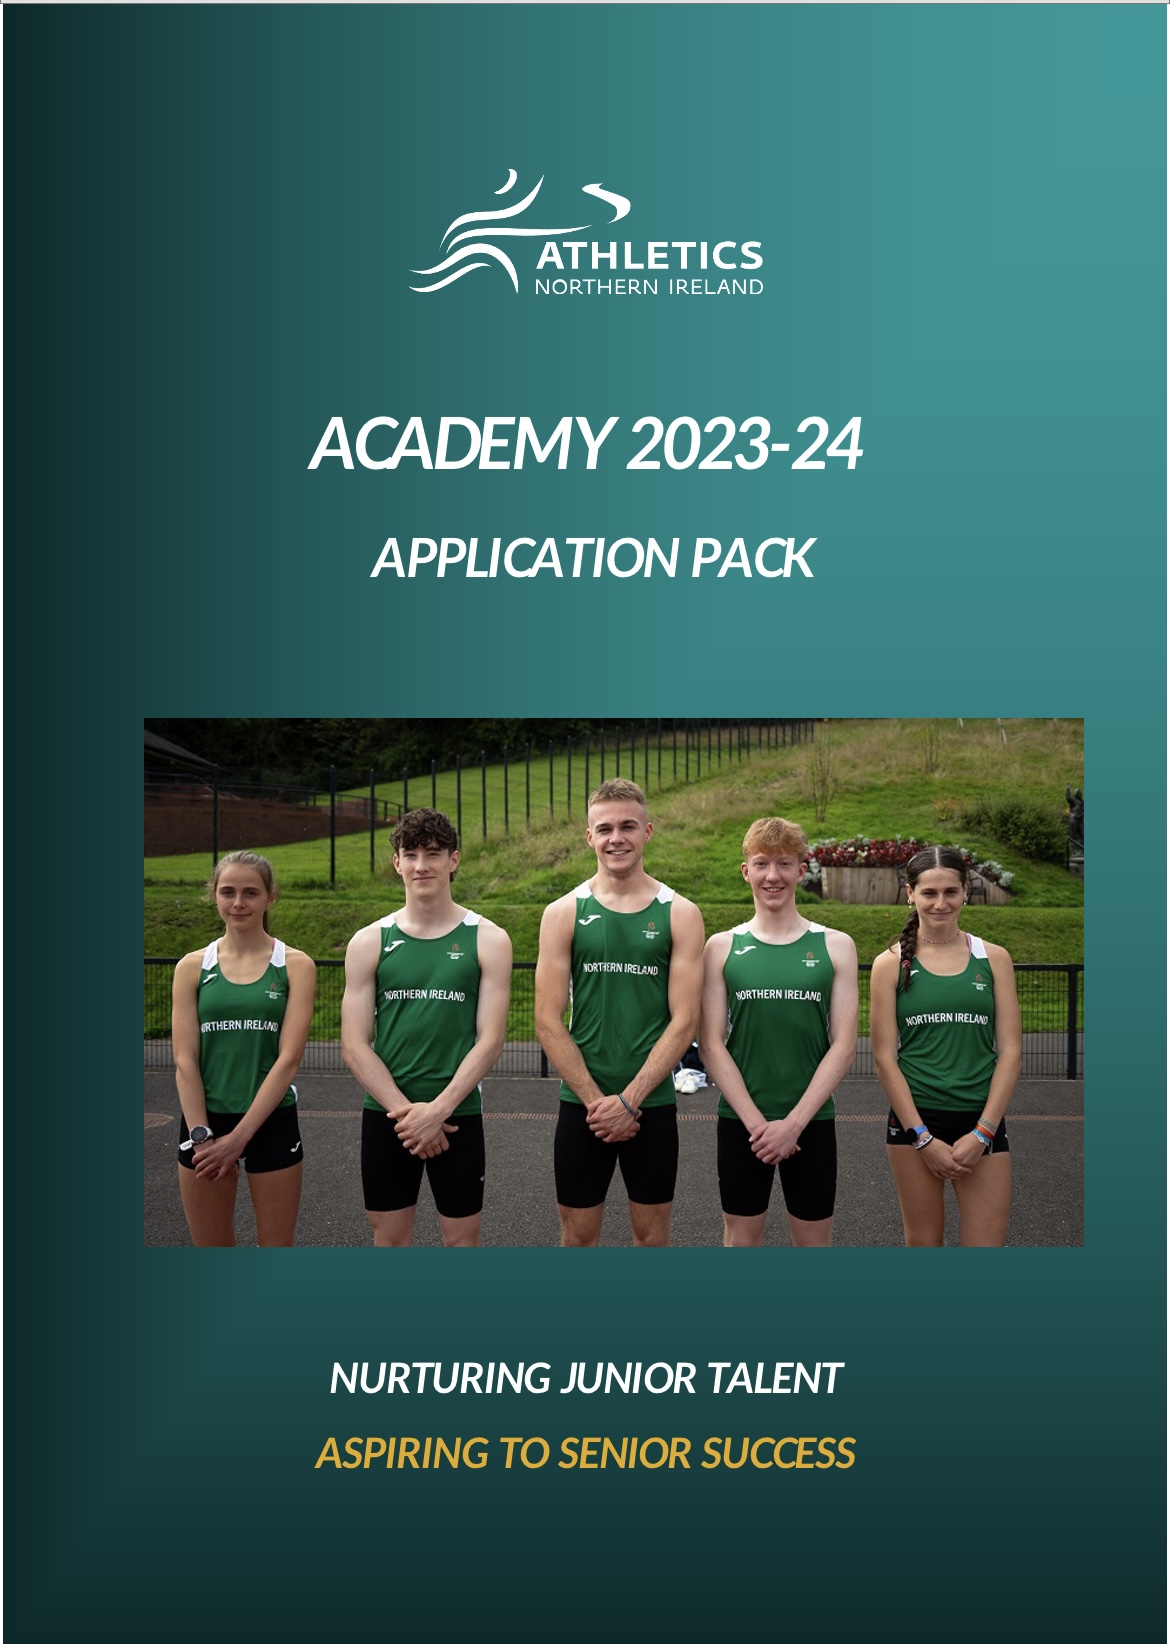 Academy 2023-24 Applications Now Open